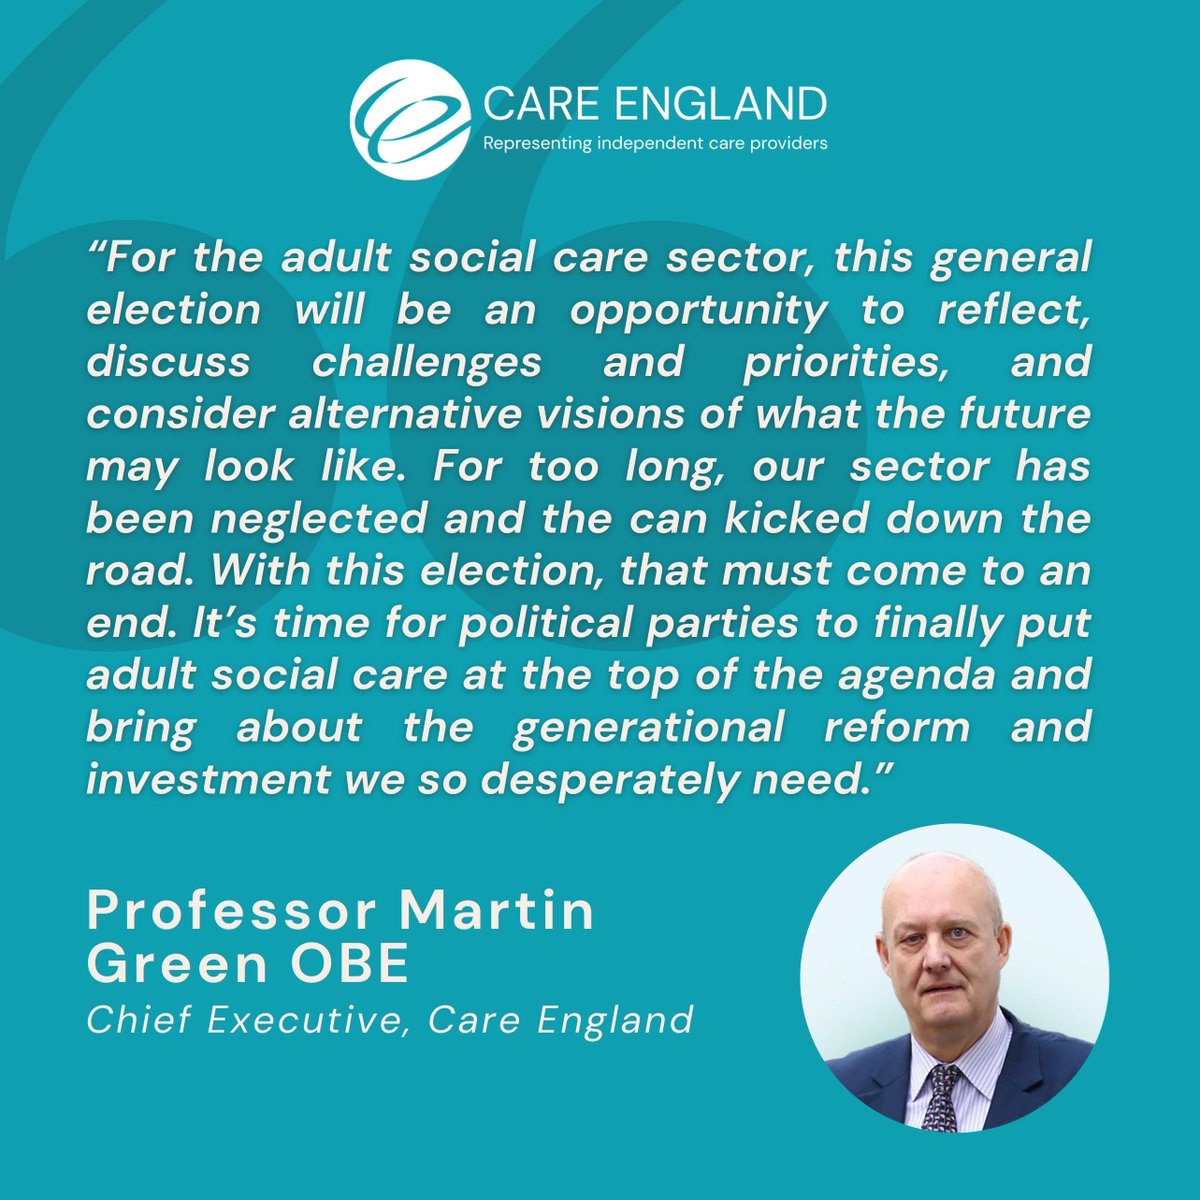 It’s official: the #GeneralElection is upon us. Here’s what @ProfMartinGreen had to say. Stay tuned to find out how Care England are fighting for adult social care in the build up to 4 July.